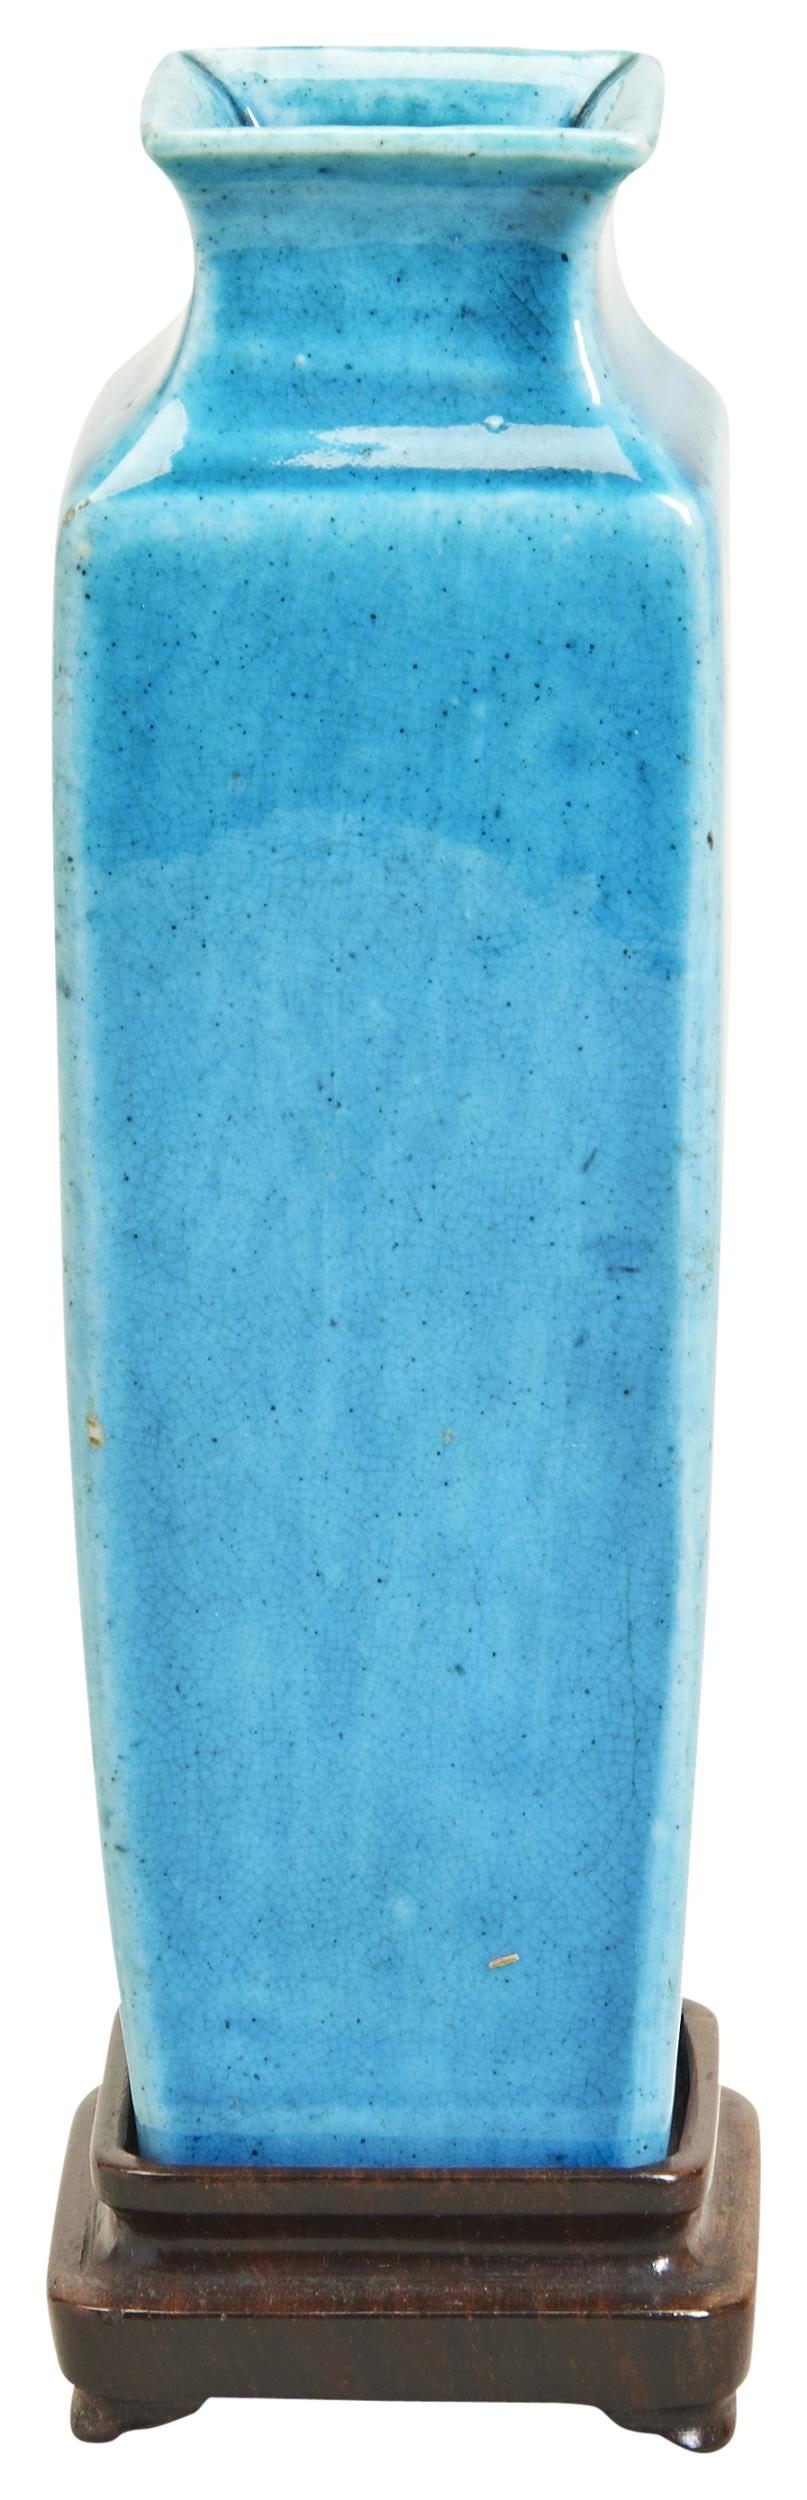 A TURQUOISE-GLAZED SQUARE VASE QING DYNASTY, 18TH CENTURY 清 孔雀绿釉方型瓶 raised on a hardwood stand,